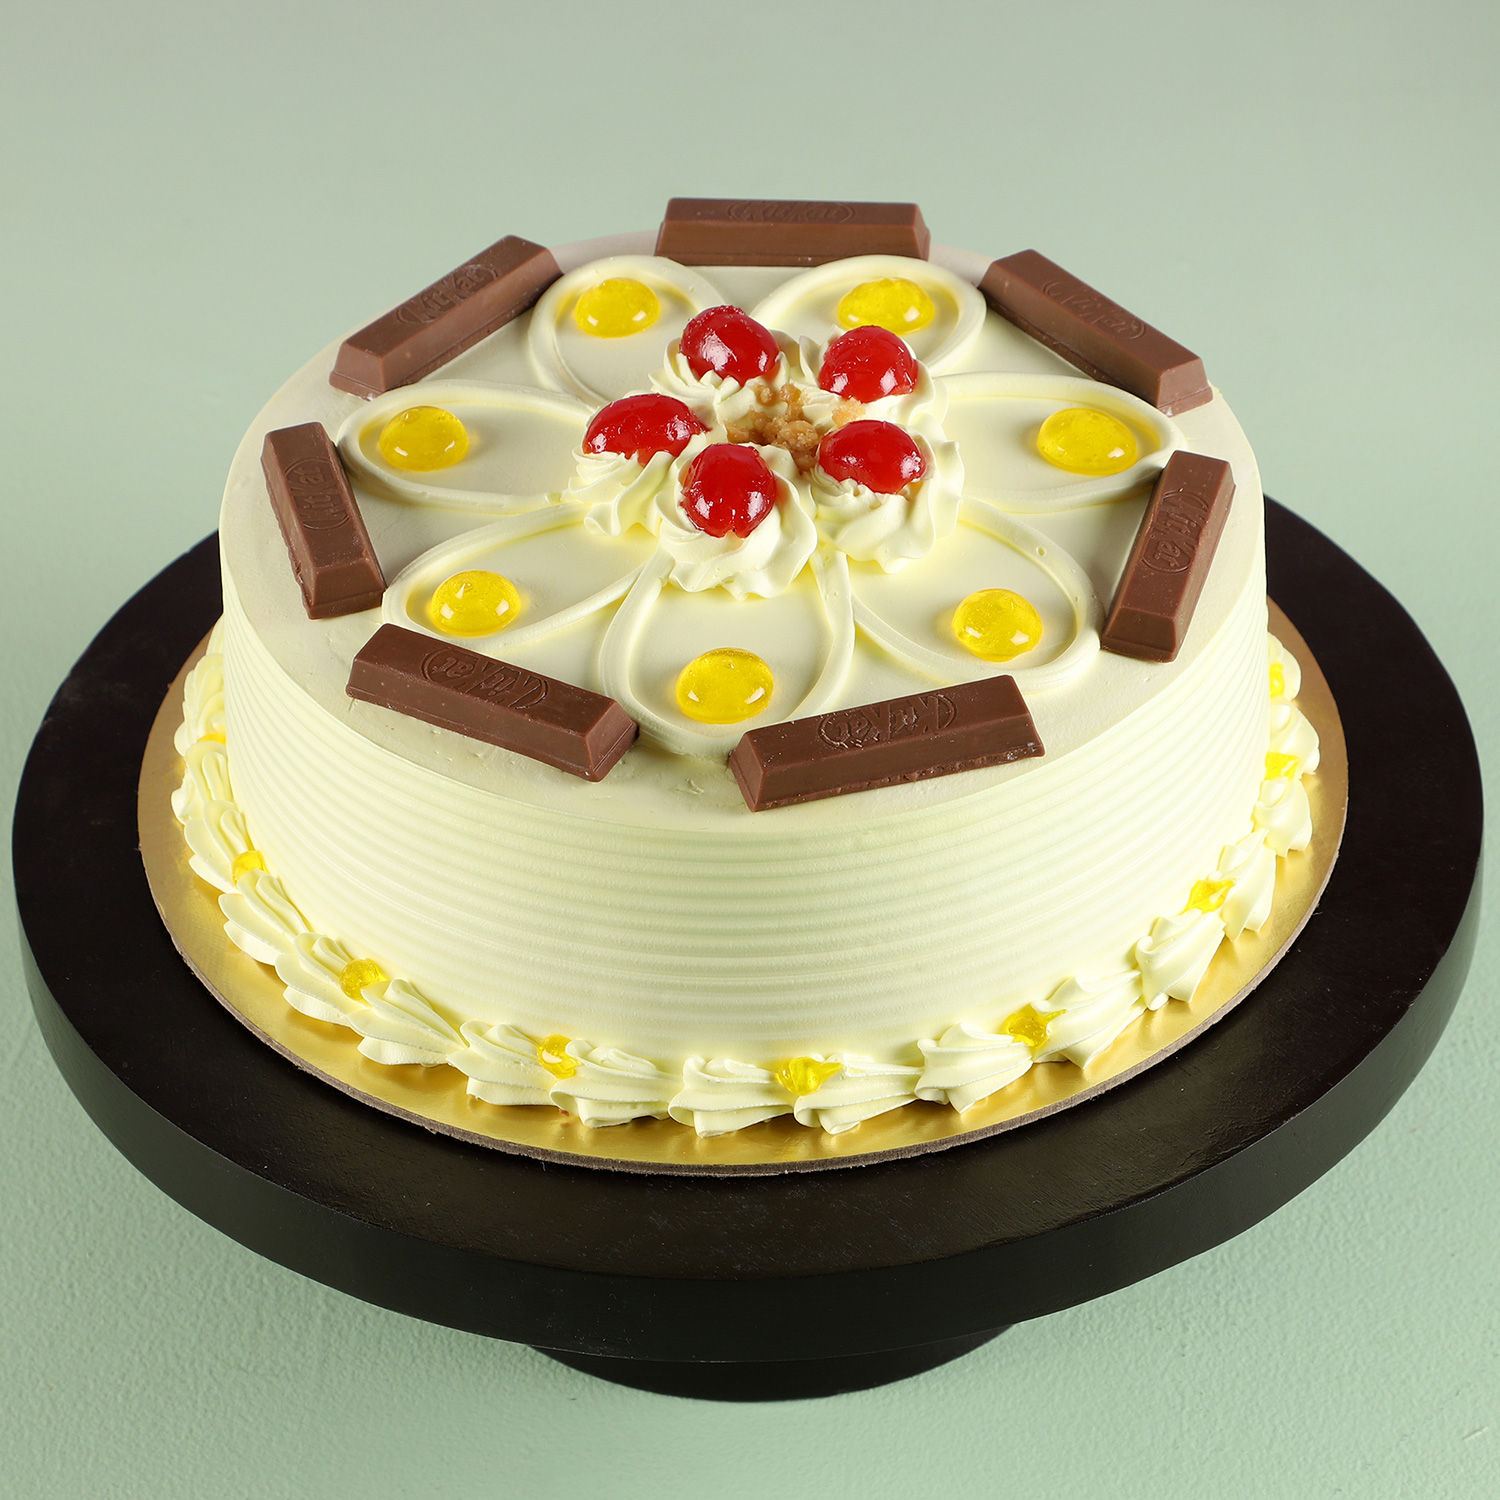 Send Delicious Eggless Butter Scotch Cake to Kerala, India - Page Details :  keralaflowersgifts.com